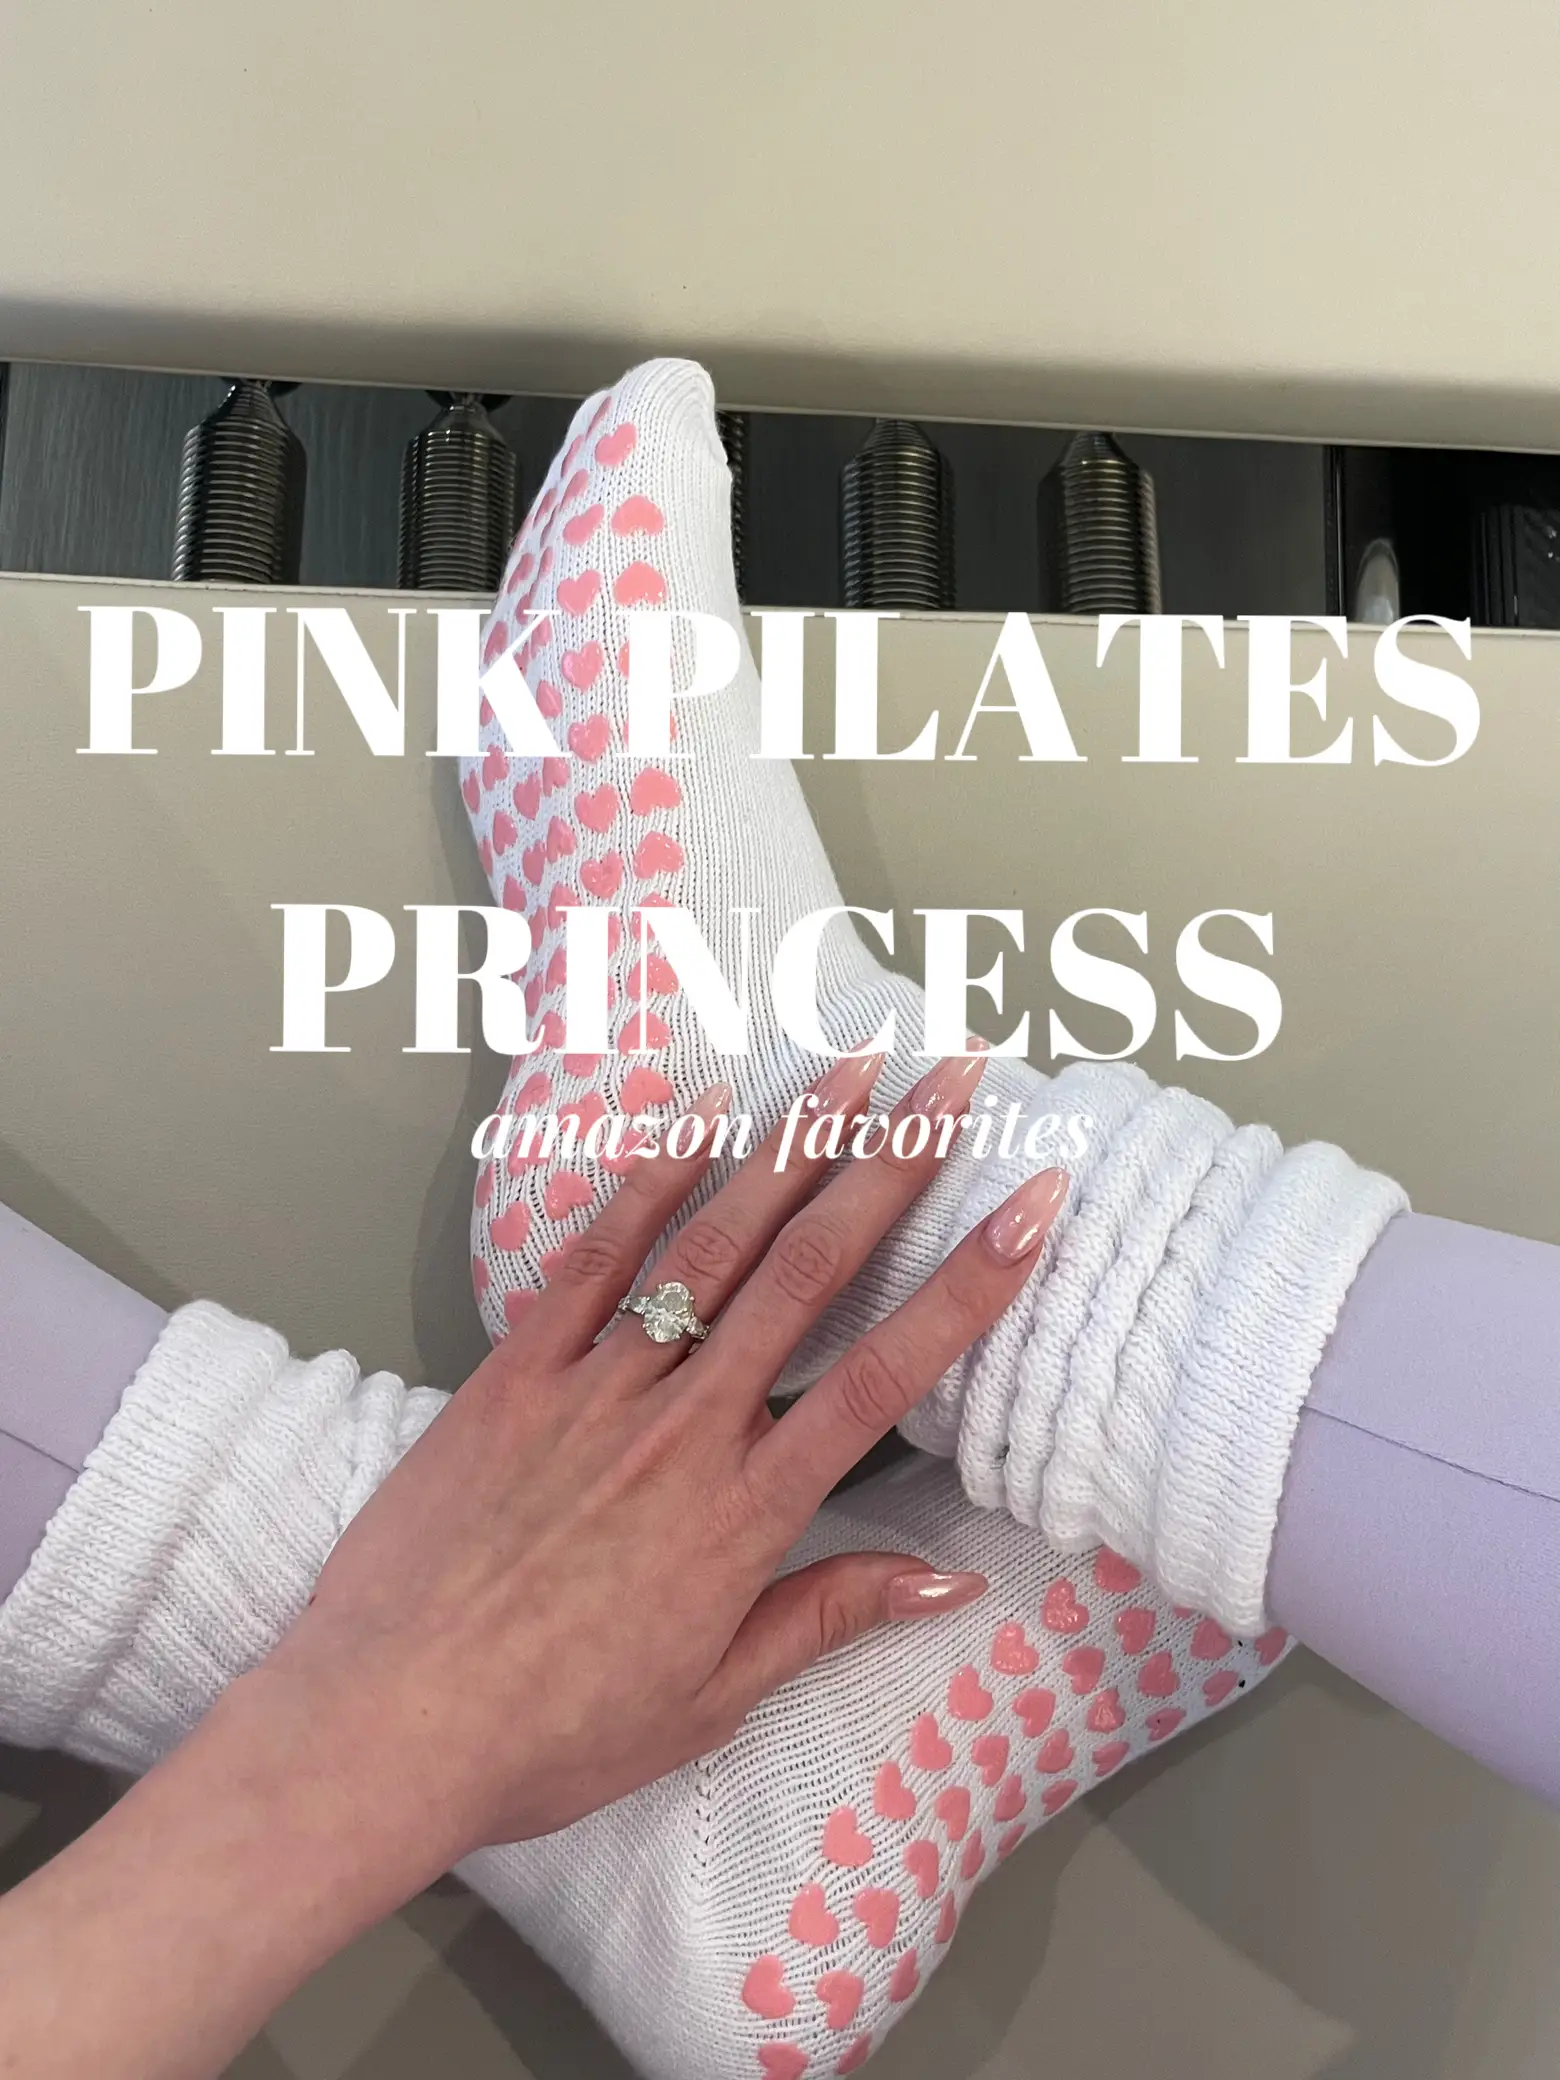 Some more Pilates  finds, Gallery posted by Bratzbabyivy246